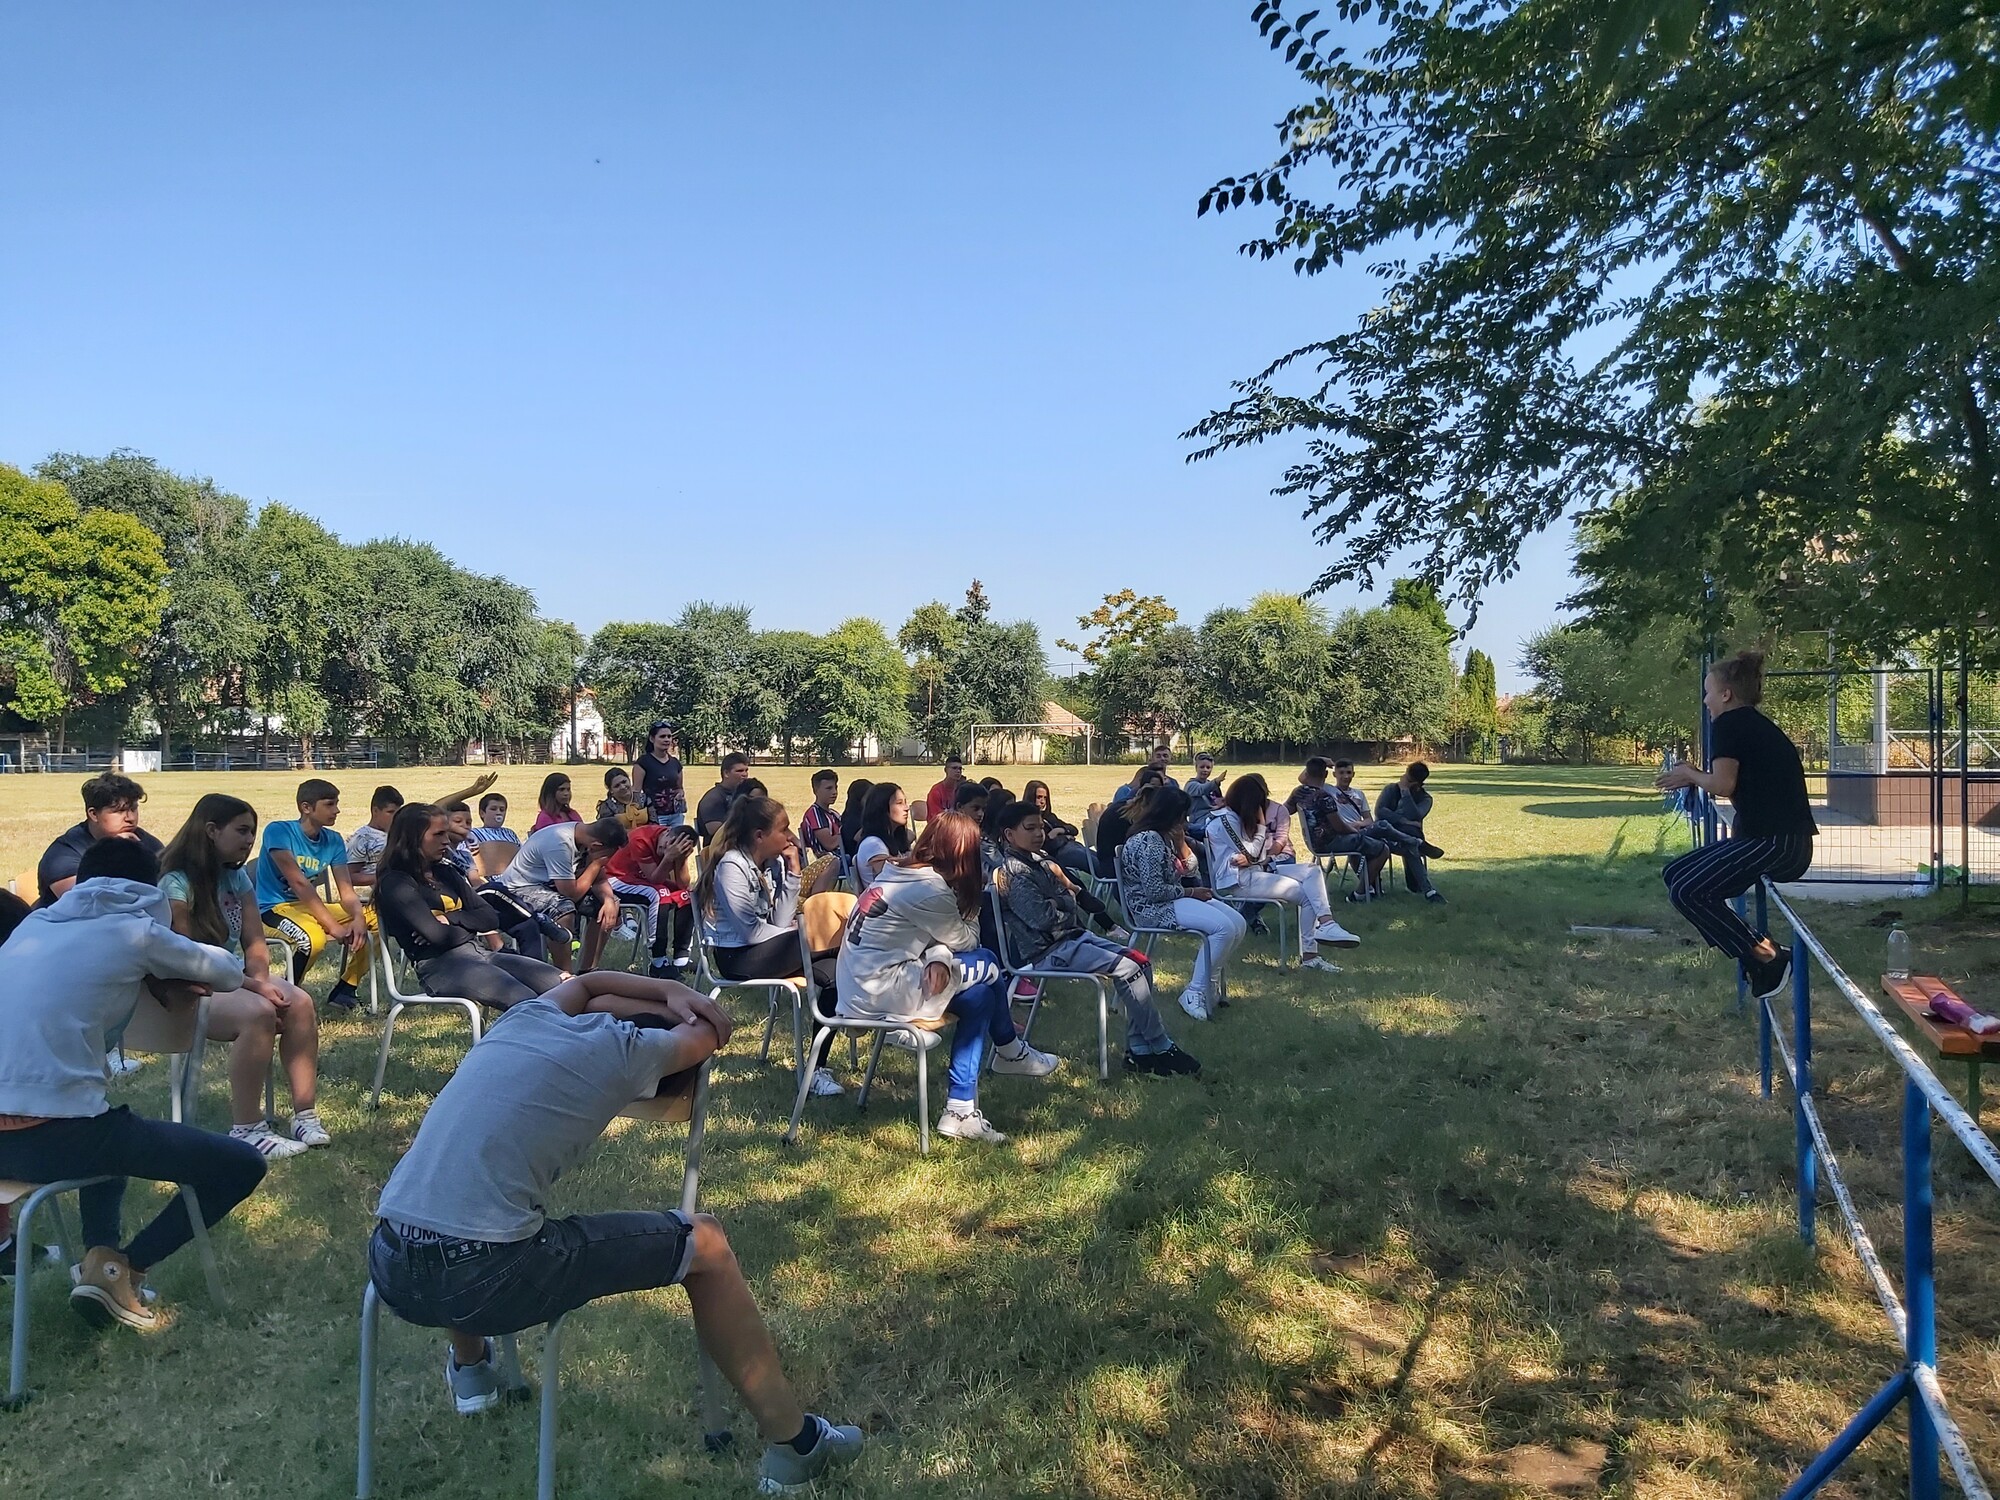 Image of people sitting outdoors at a park during a performance.